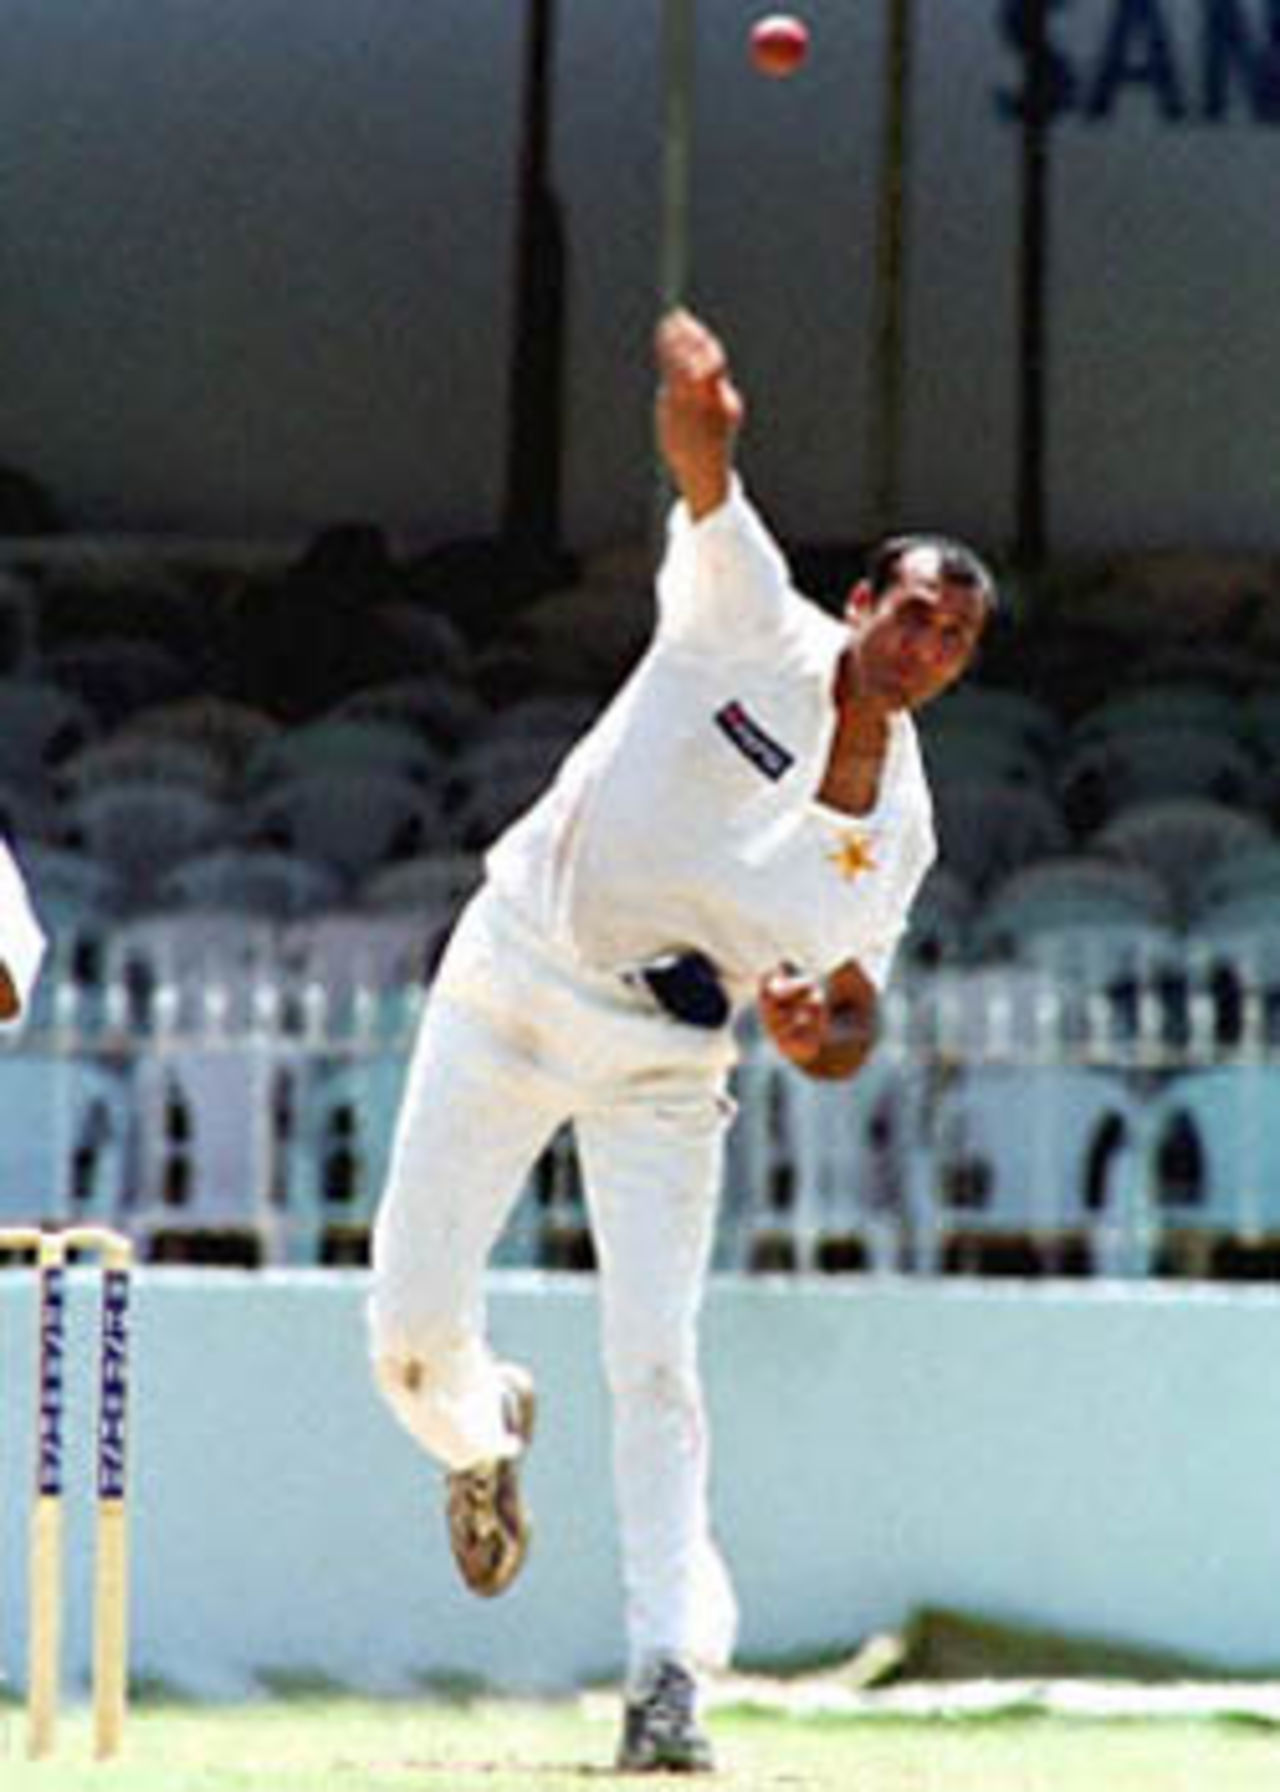 Pakistan spinner Arshad Khan sports matching shoes as he delivers; 15 June 2000 in the first test against Sri Lanka here in the capital Colombo. Khan bagged four wickets for 62 runs. Pakistan in Sri Lanka, 1999/00, 1st Test, Sri Lanka v Pakistan, Sinhalese Sports Club Ground, Colombo, 14-18 June 2000 (Day 2).